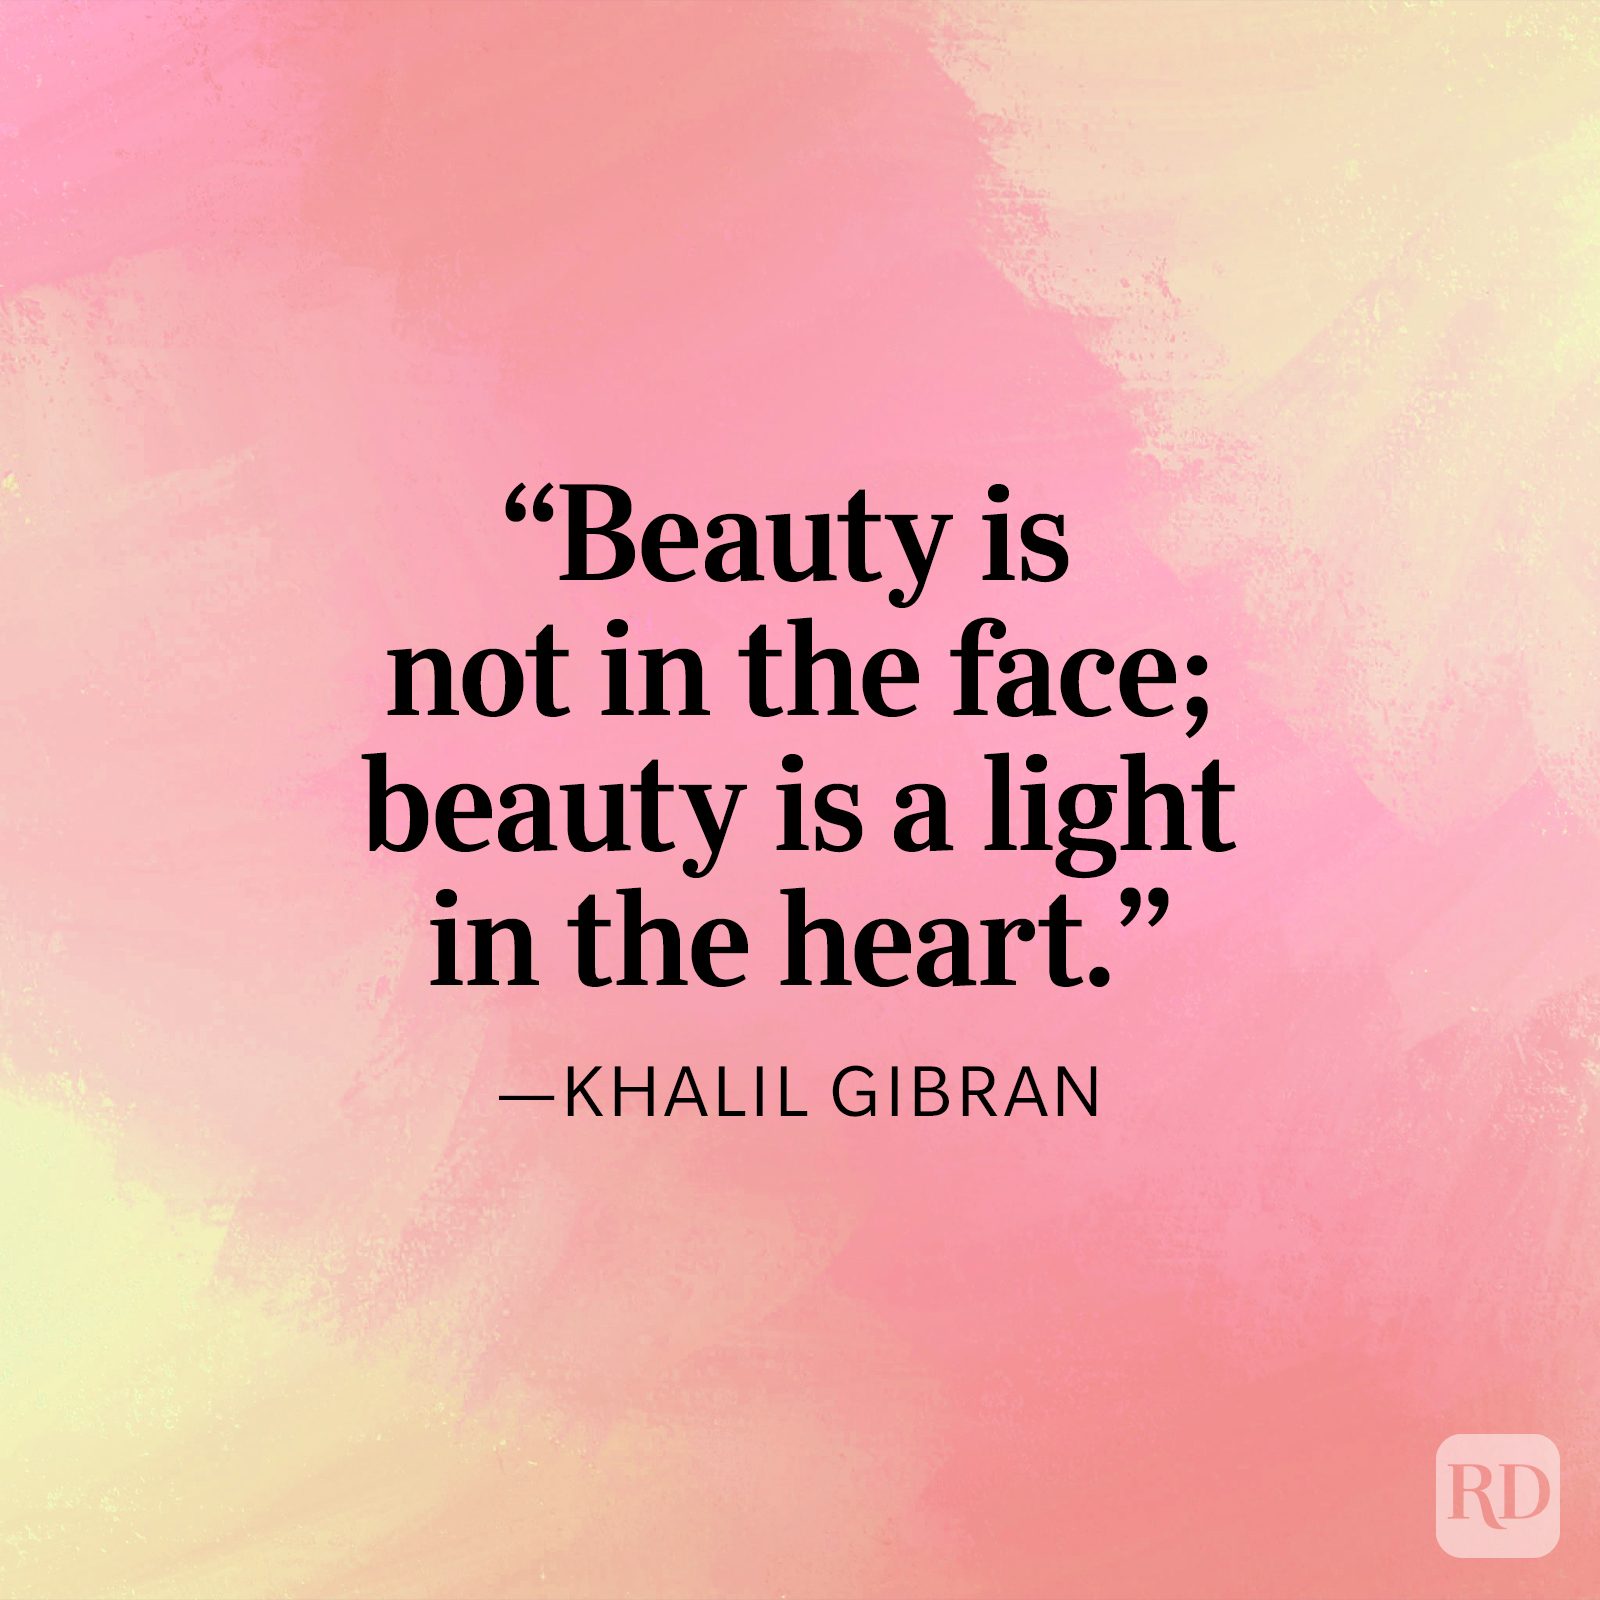 A Light In The Heart Khalil Gibran Beauty Quote